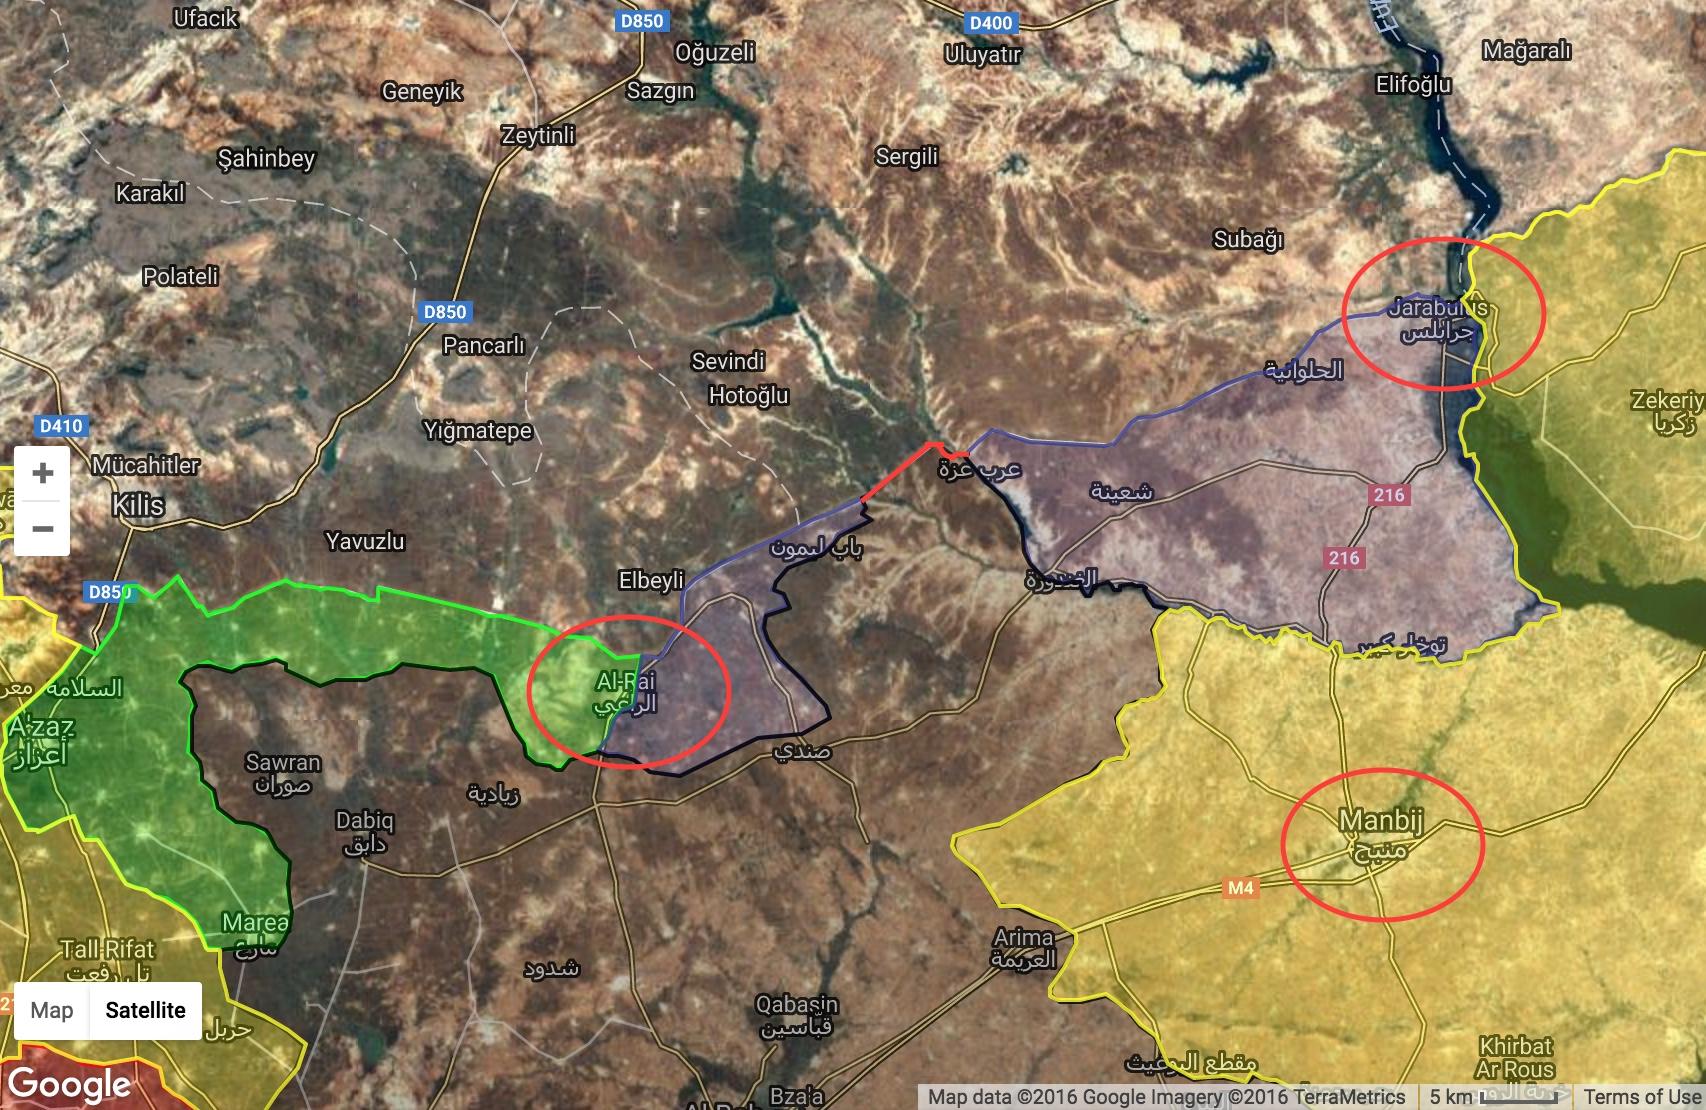 Turkish-backed rebels have been closing in on Isis on two sides from Jarablus (circled in NE) and Al-Rai (circled to W), leaving only a tiny stretch still connecting Isis with the rest of the world. It became apparent Isis was losing control of the border area when the key town of Manbij (circled, SE) fell in early August